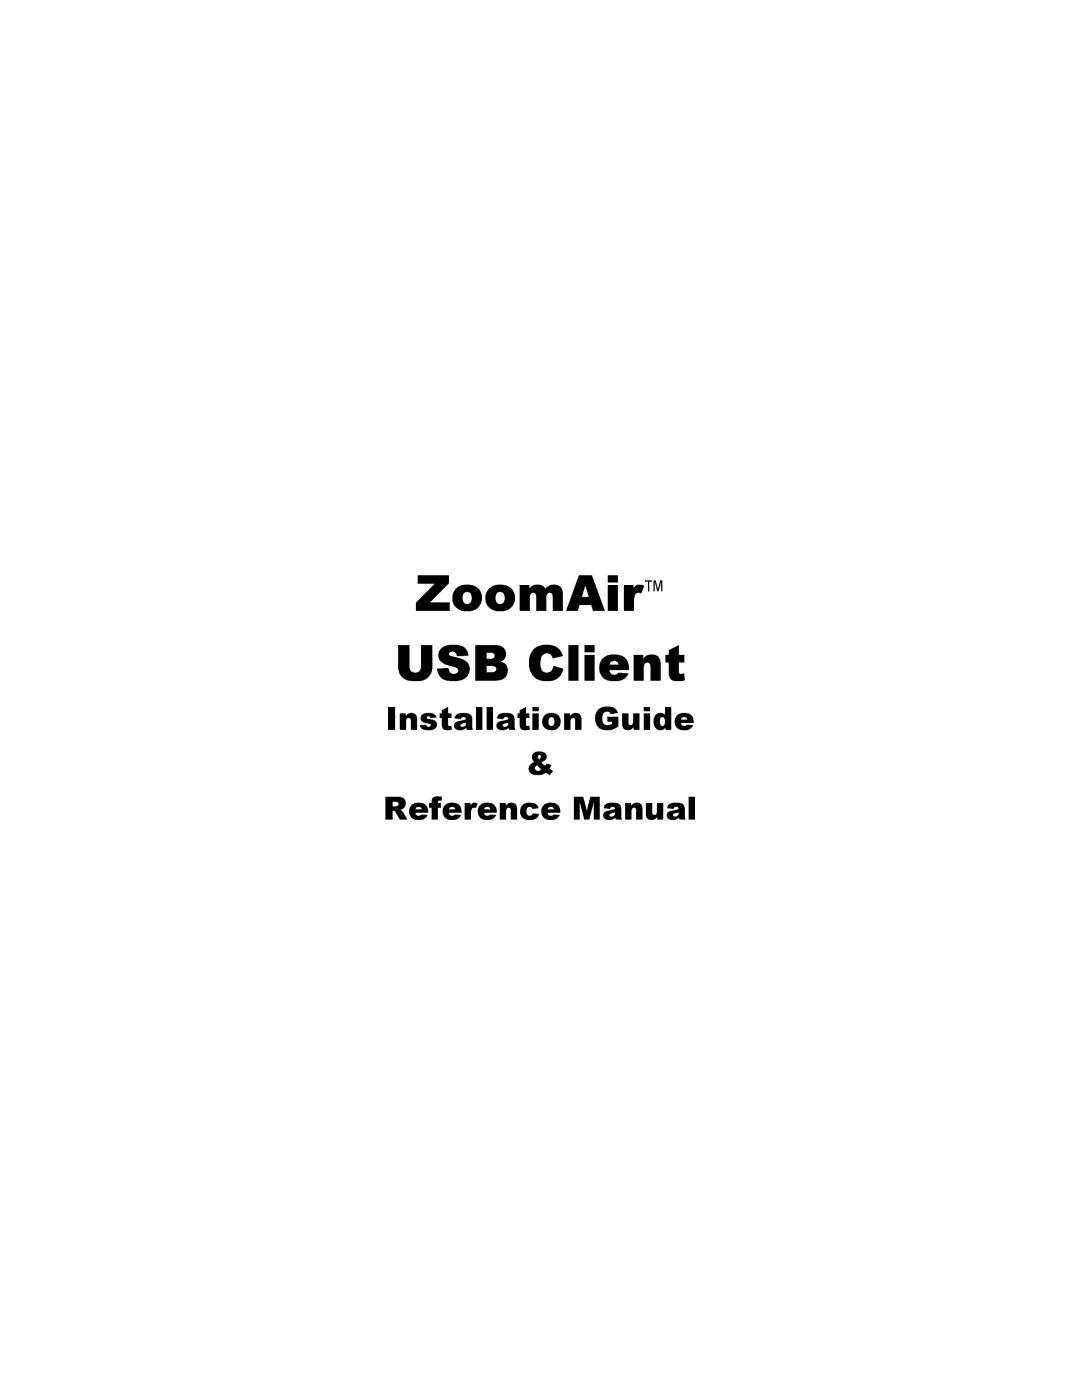 Zoom manual ZoomAir USB Client, Installation Guide Reference Manual 